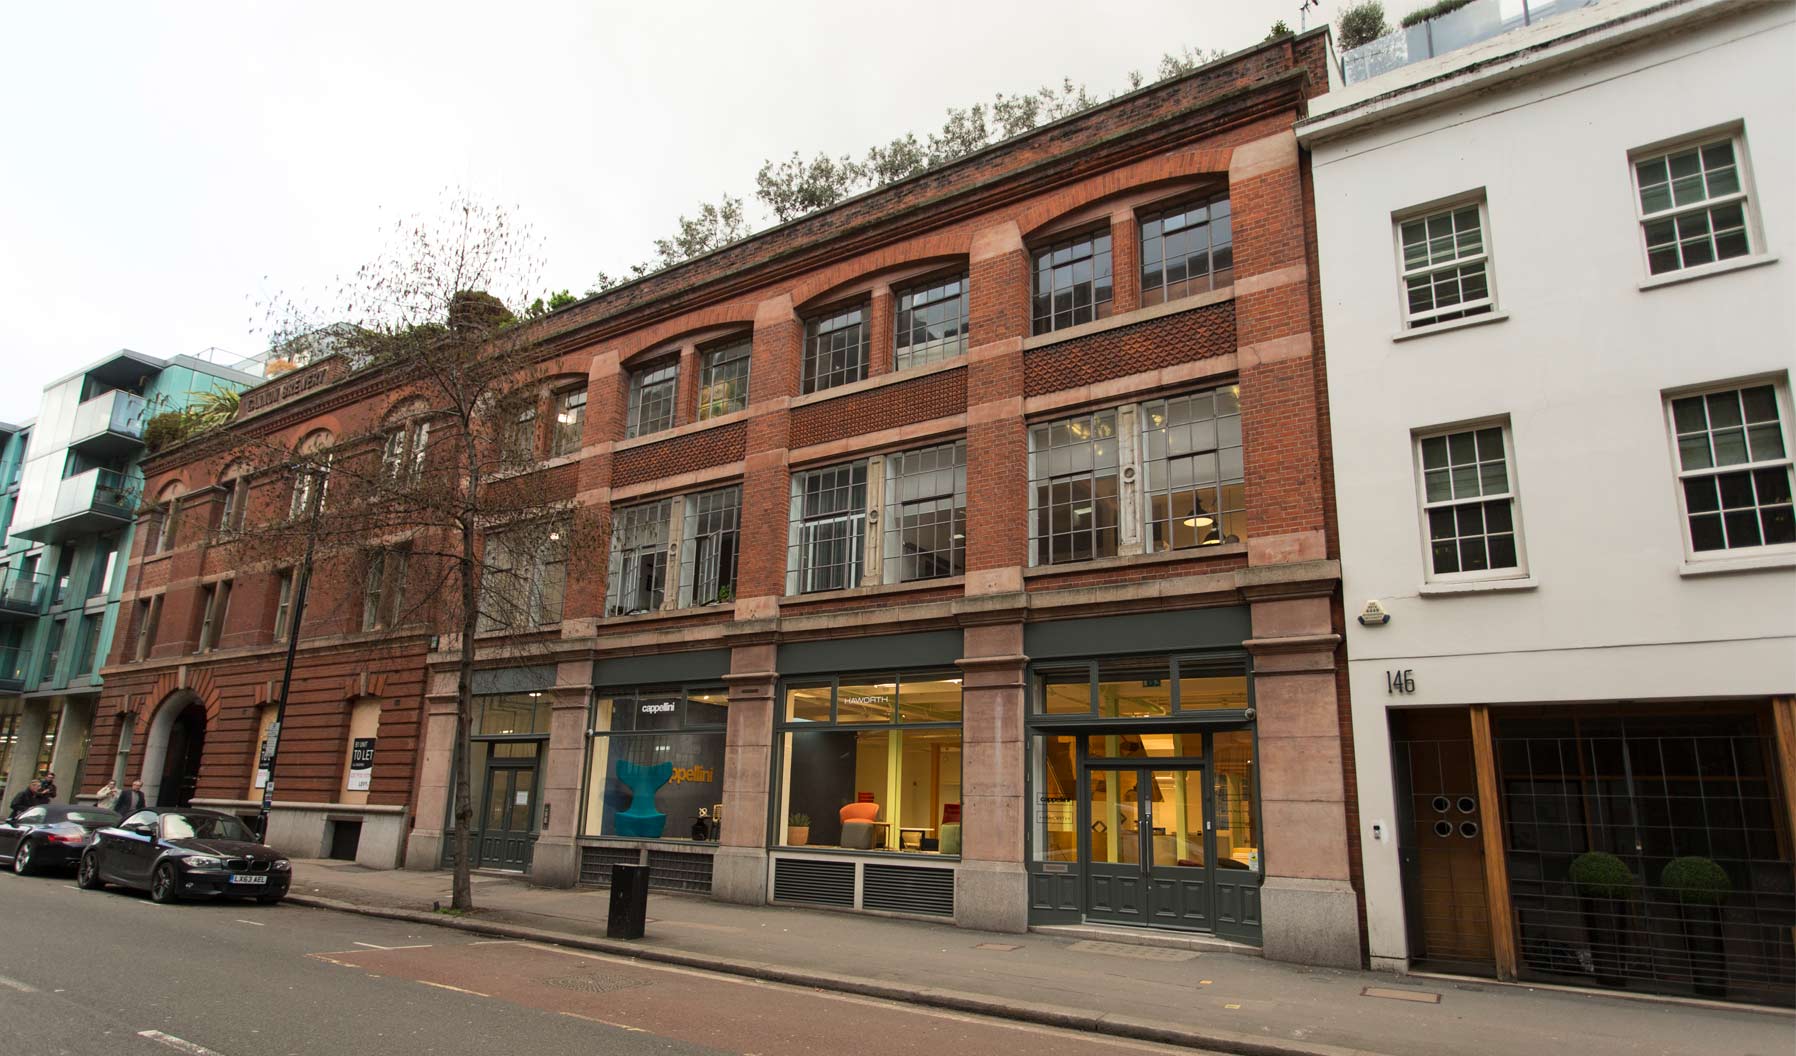 Haworth's London showroom in the heart of Clerkenwell. The space is shared with our brand partner, Cappellini.